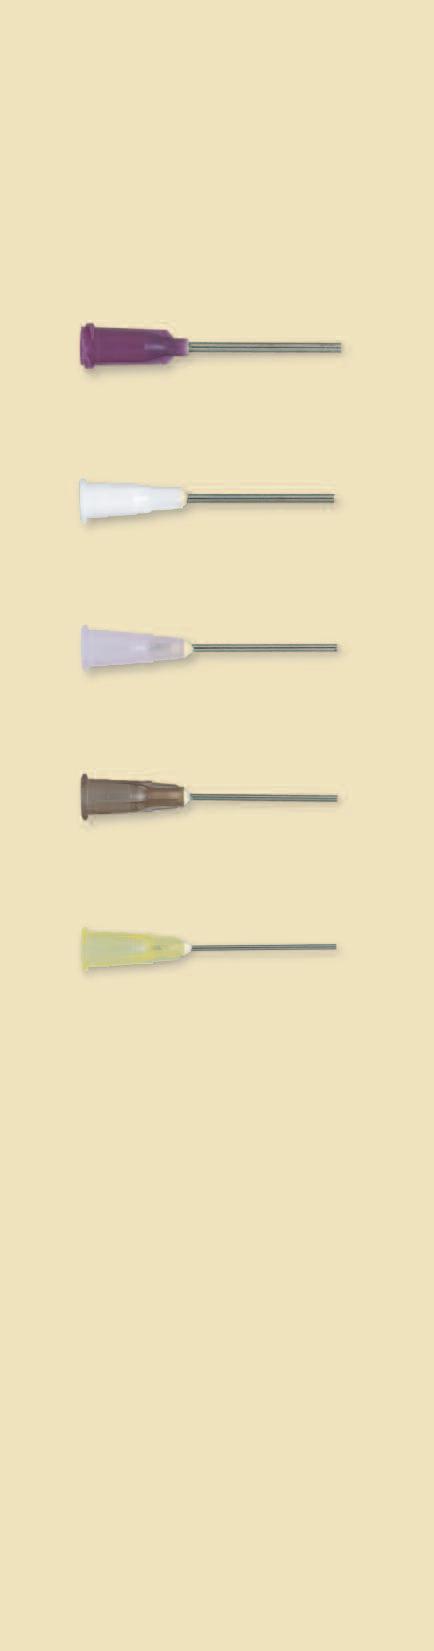 RESTORATIVE Cryosurgery - Tip Attachments Spray Tips (shown actualsize) Cutaneous Probes* (notactualsize) Cryocones (notactualsize) Spray Tip, 16 gauge 1006516 (purple) Cutaneous Probe, 2mm 1006602